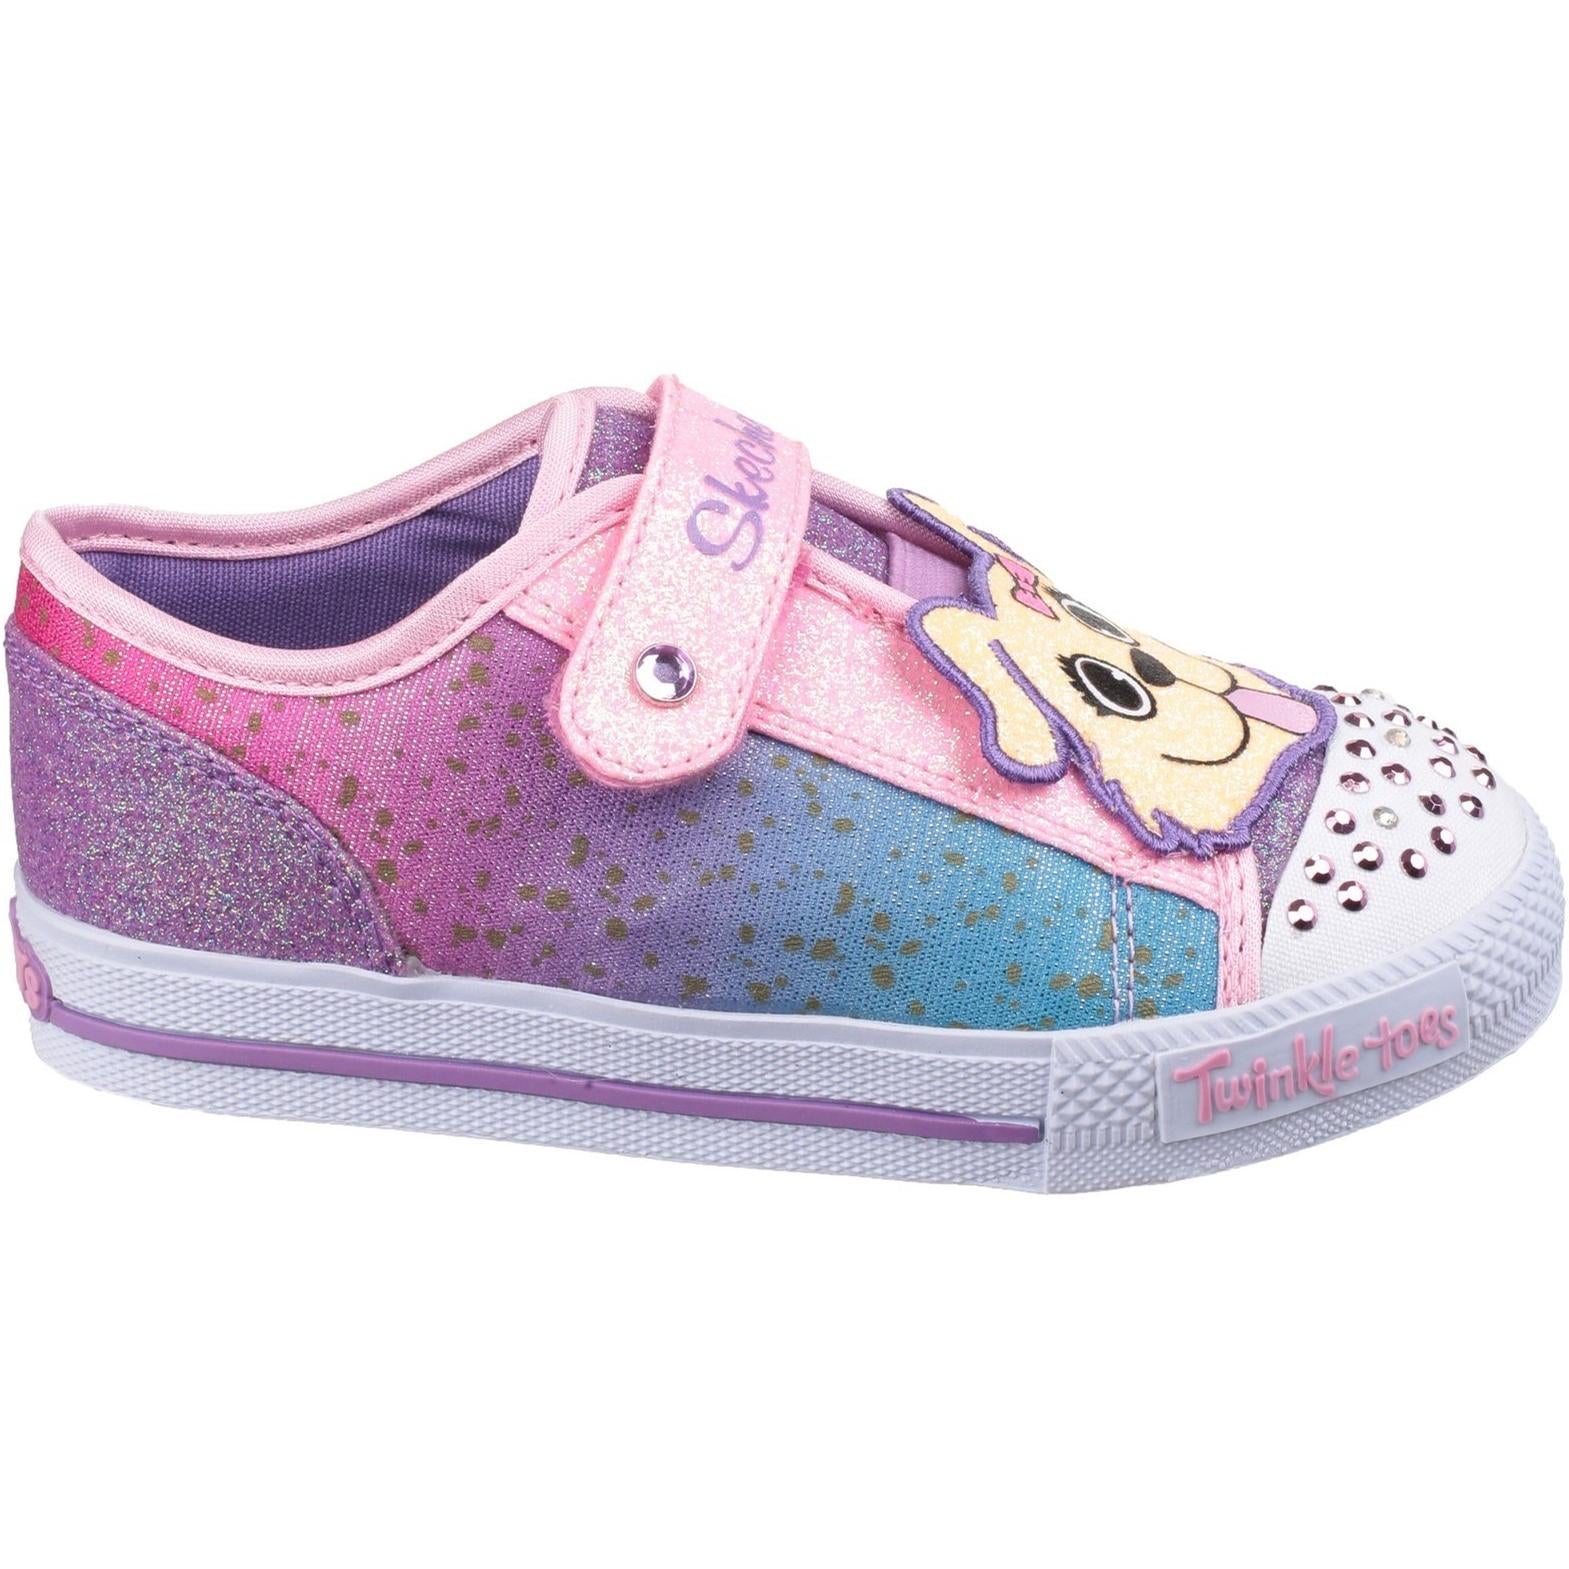 Skechers Shuffles - Play Dates Trainers